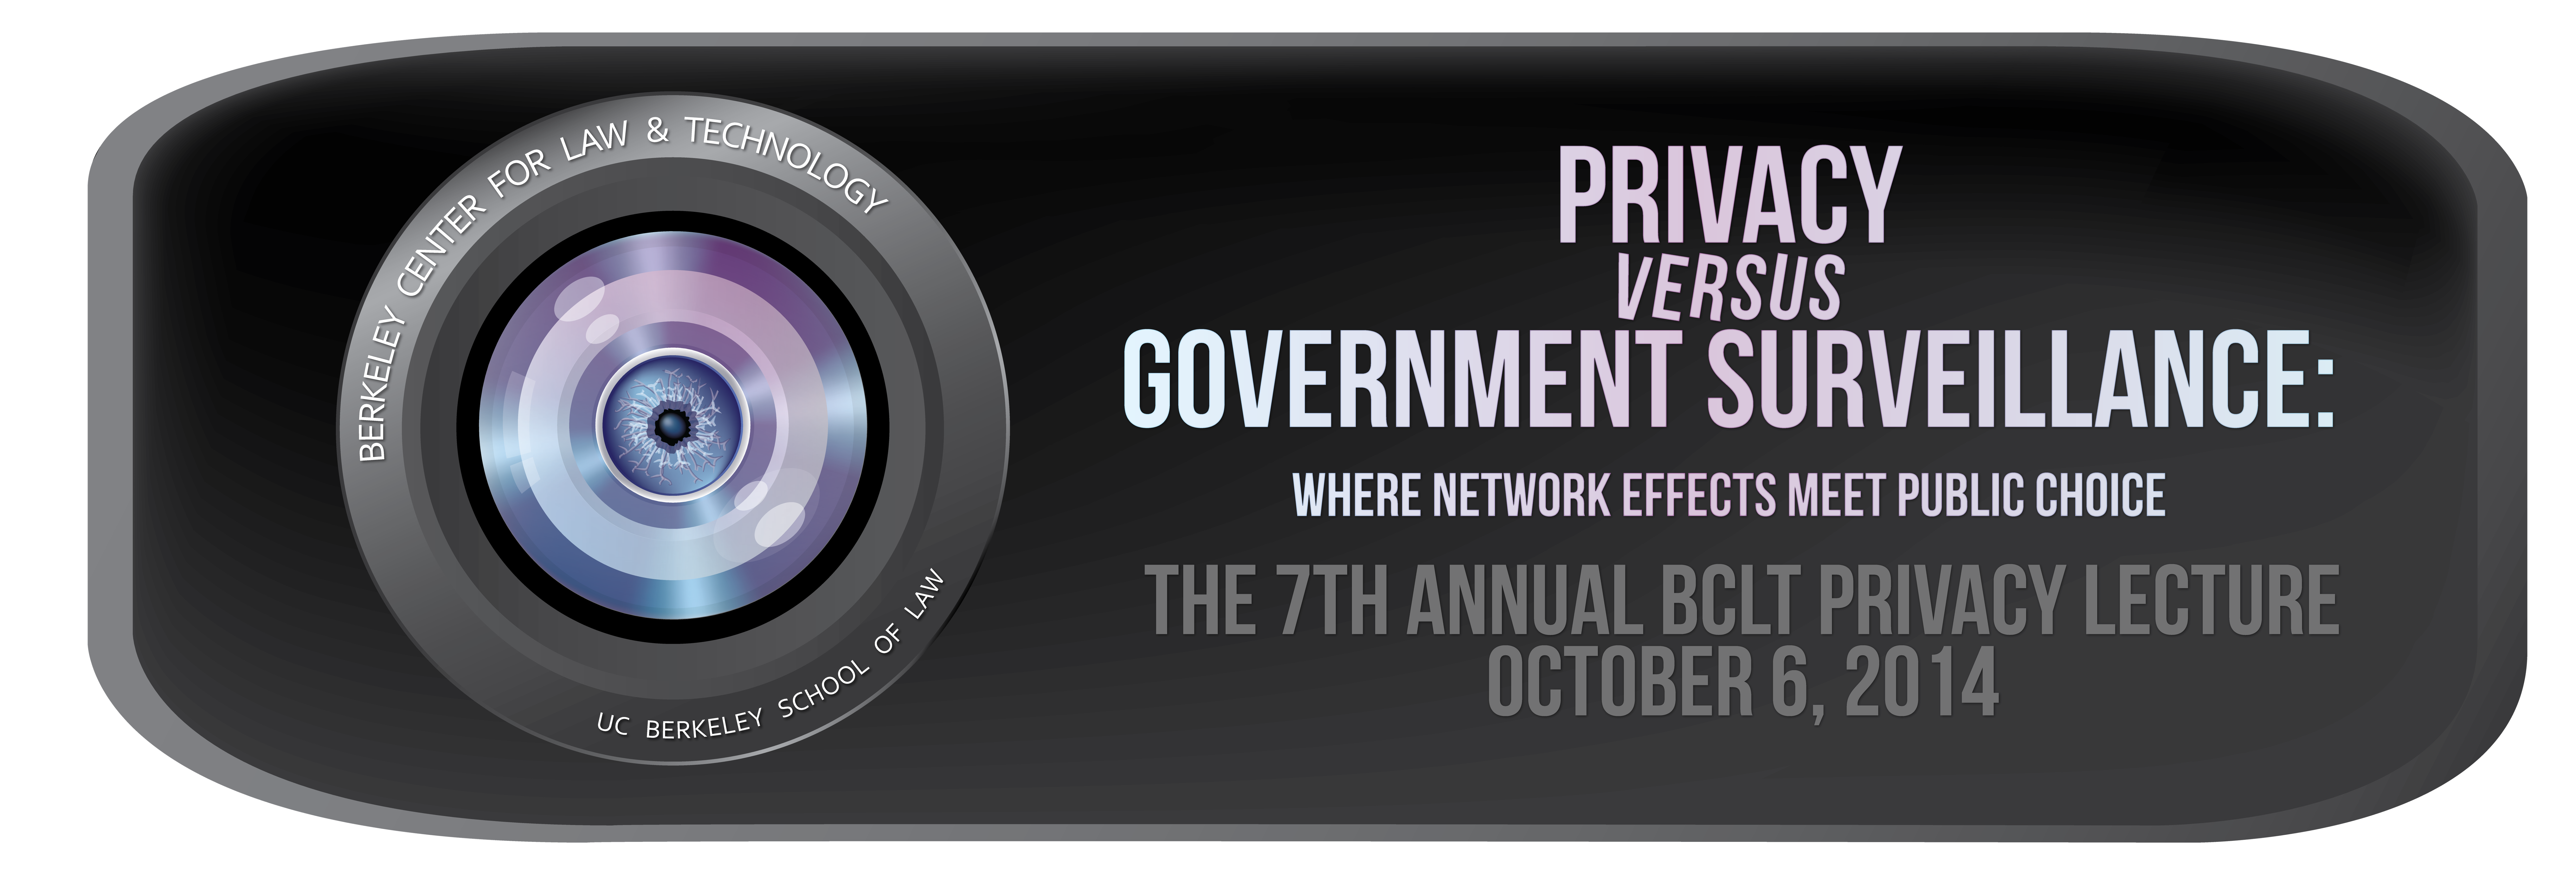 Privacy vs government surveillance: where network effects meet public choice. The 7th annual BCLT privacy lecture. October 6, 2014.